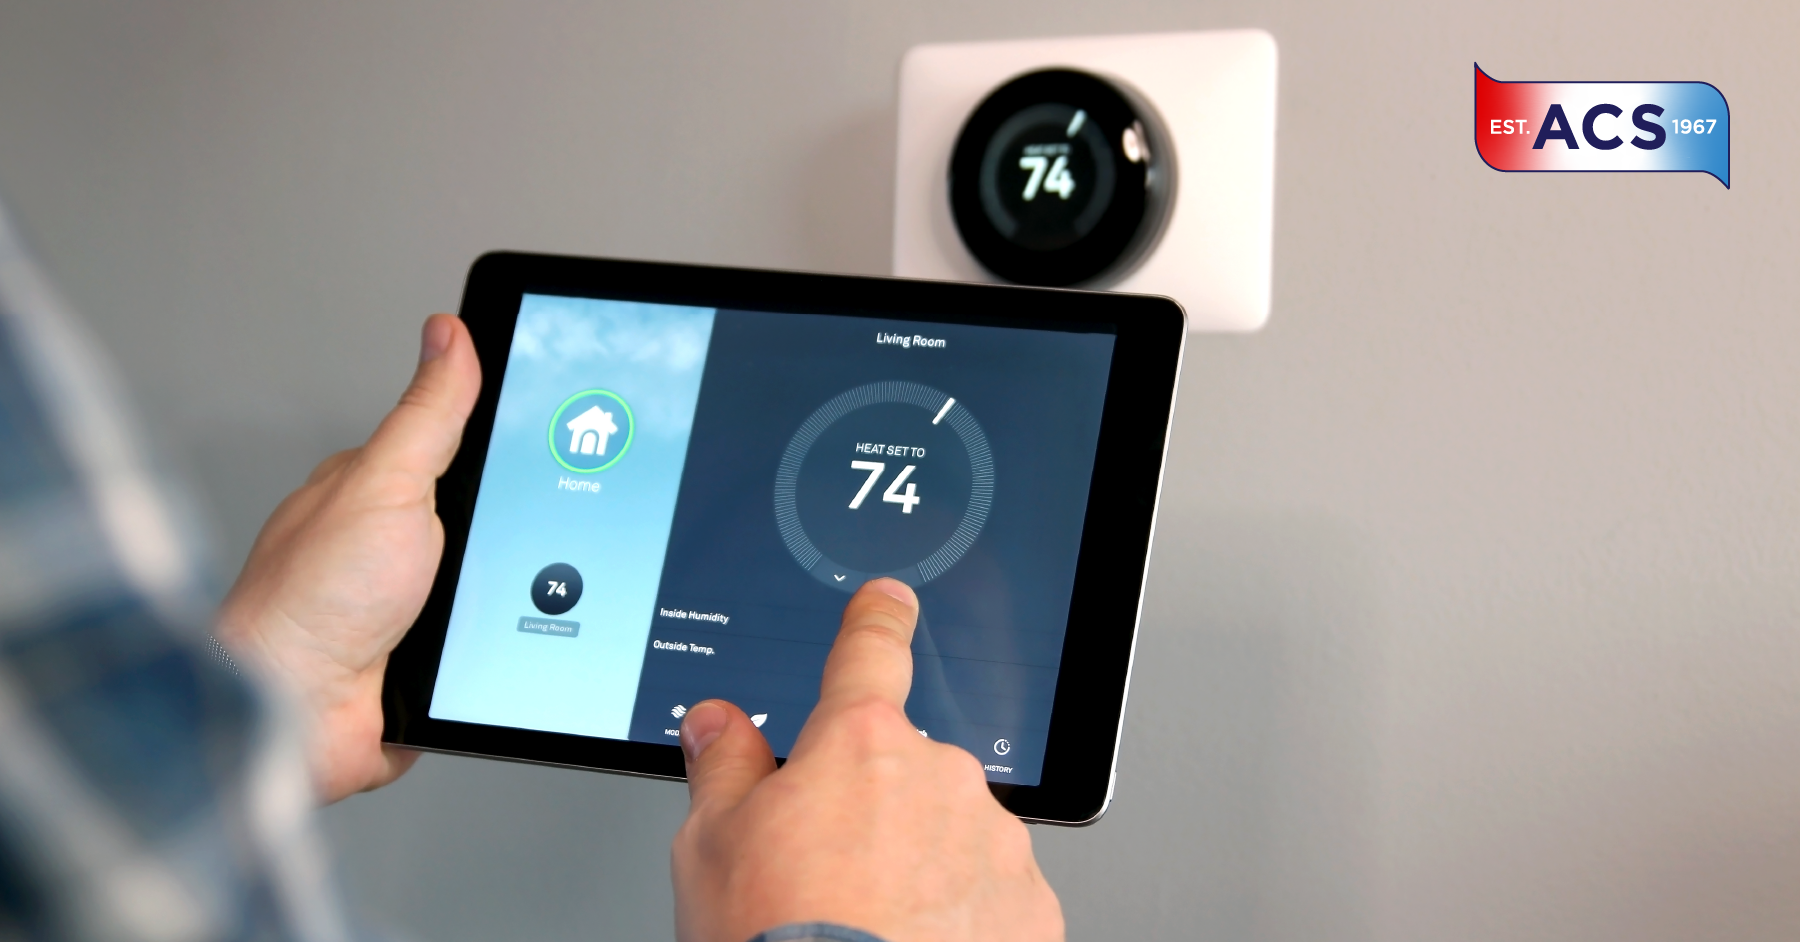 Homeowner resetting a smart thermostat in their home